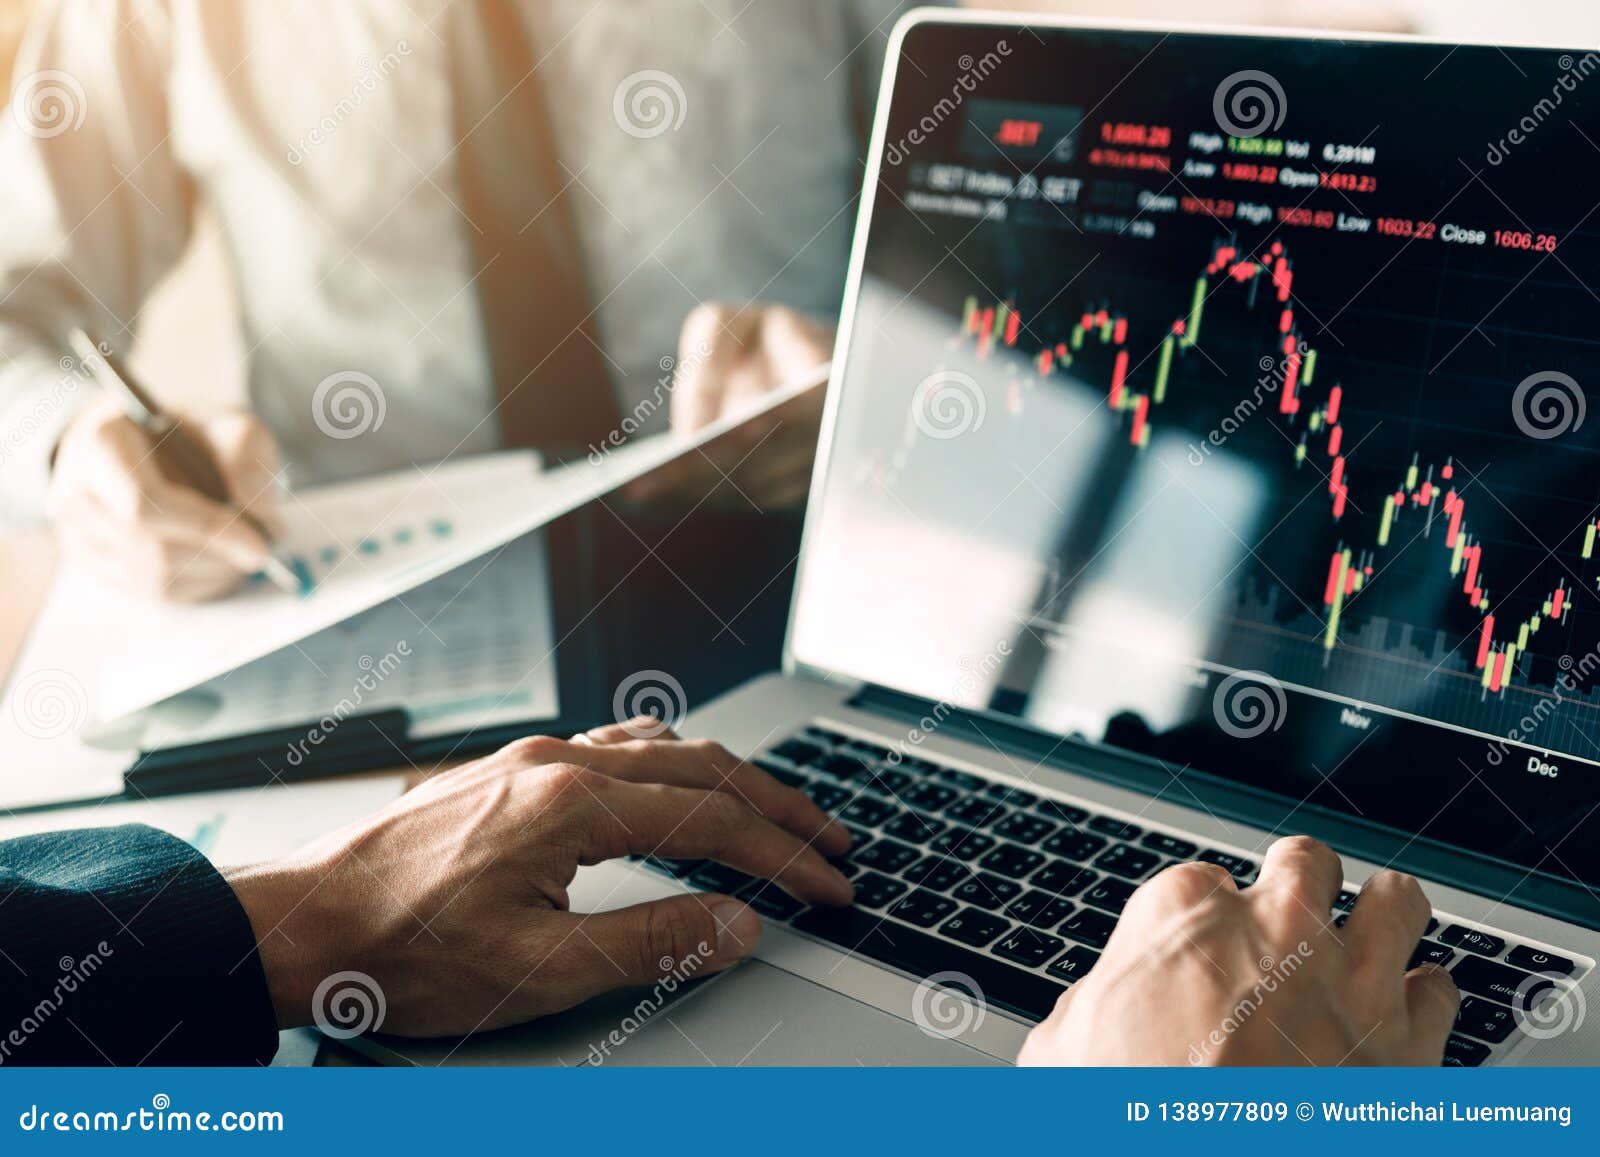 investors are using laptops entering investment websites stocks market and partners are taking notes and analyzing performance